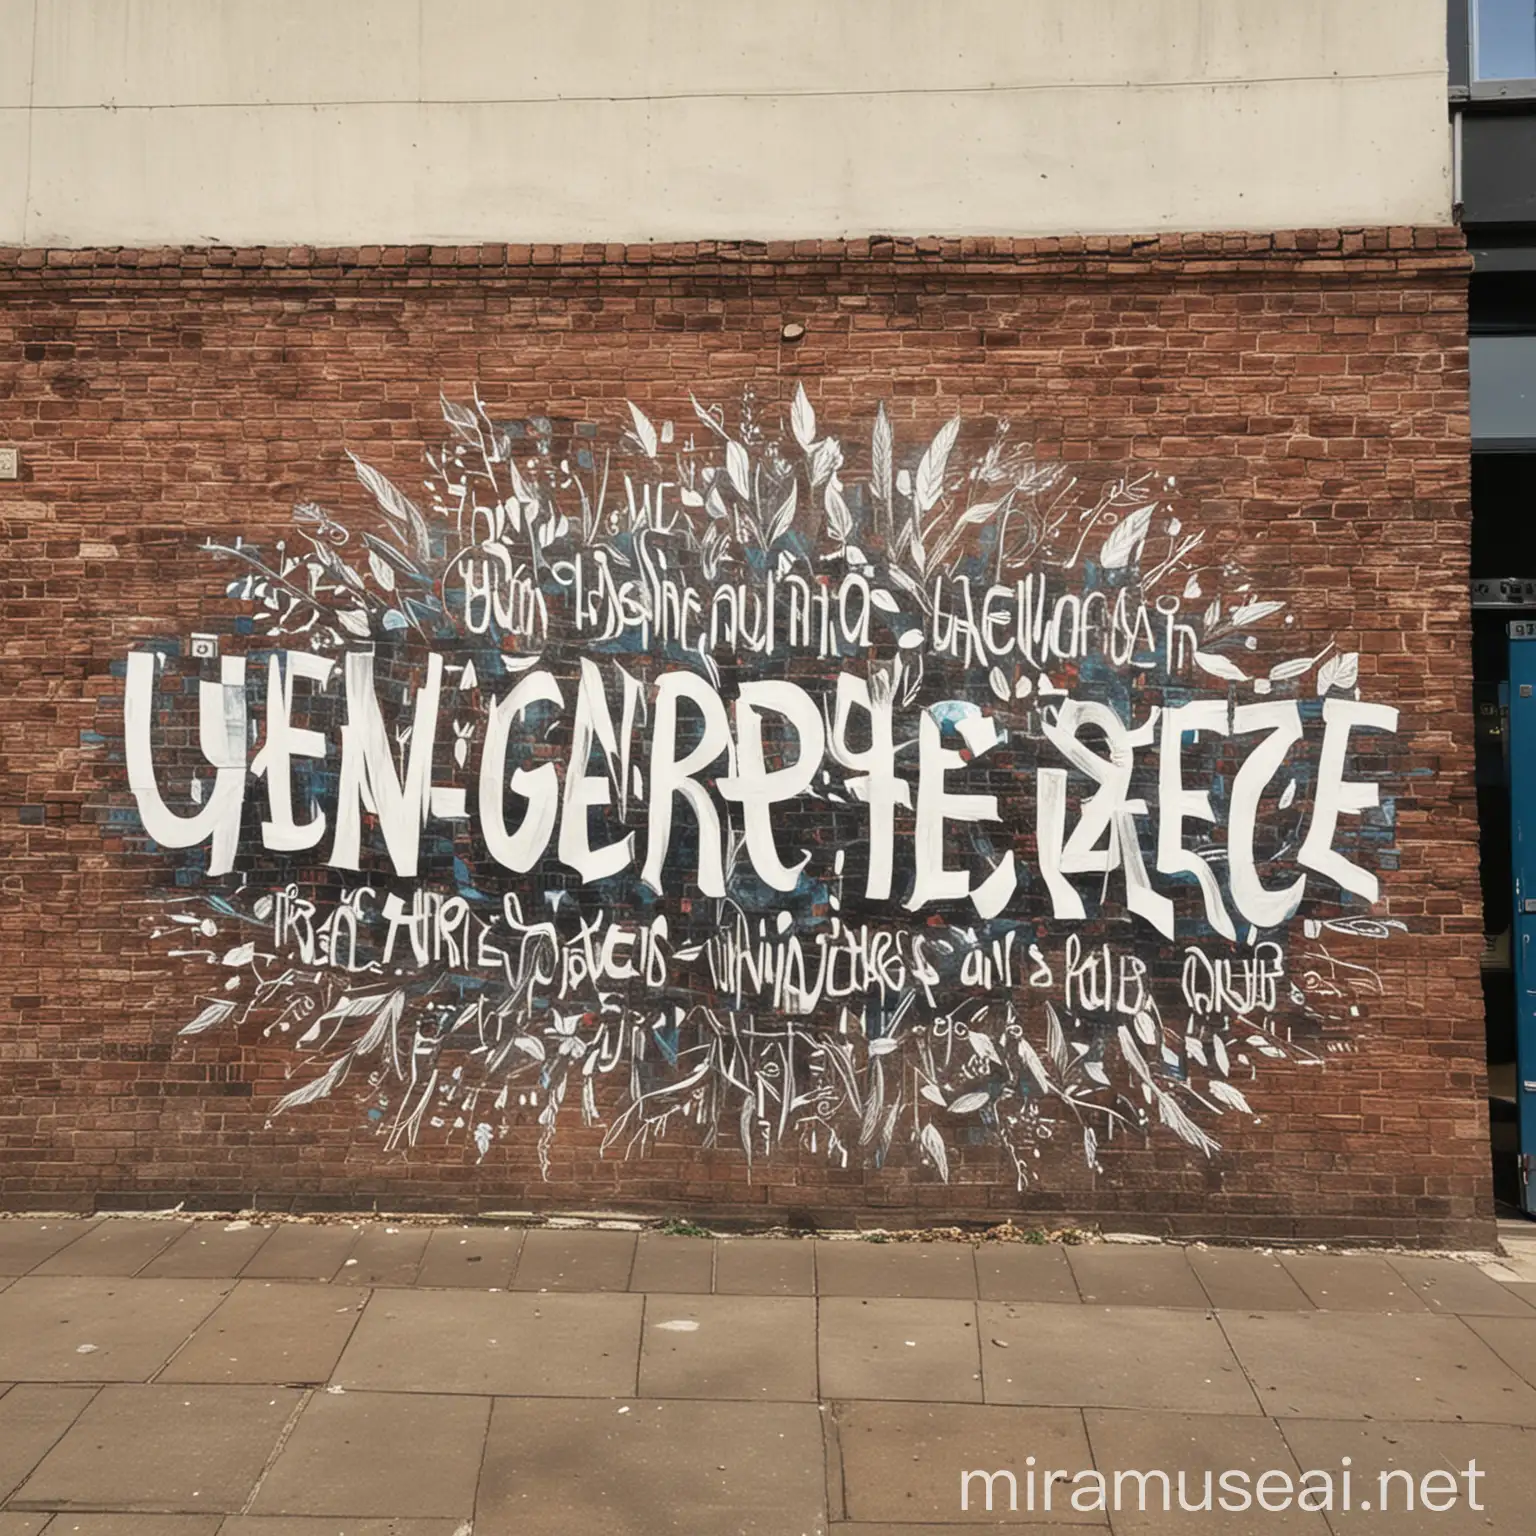 generate a mural in a university that has different peace phrases written by different people who approach to write them to promote peace in our university